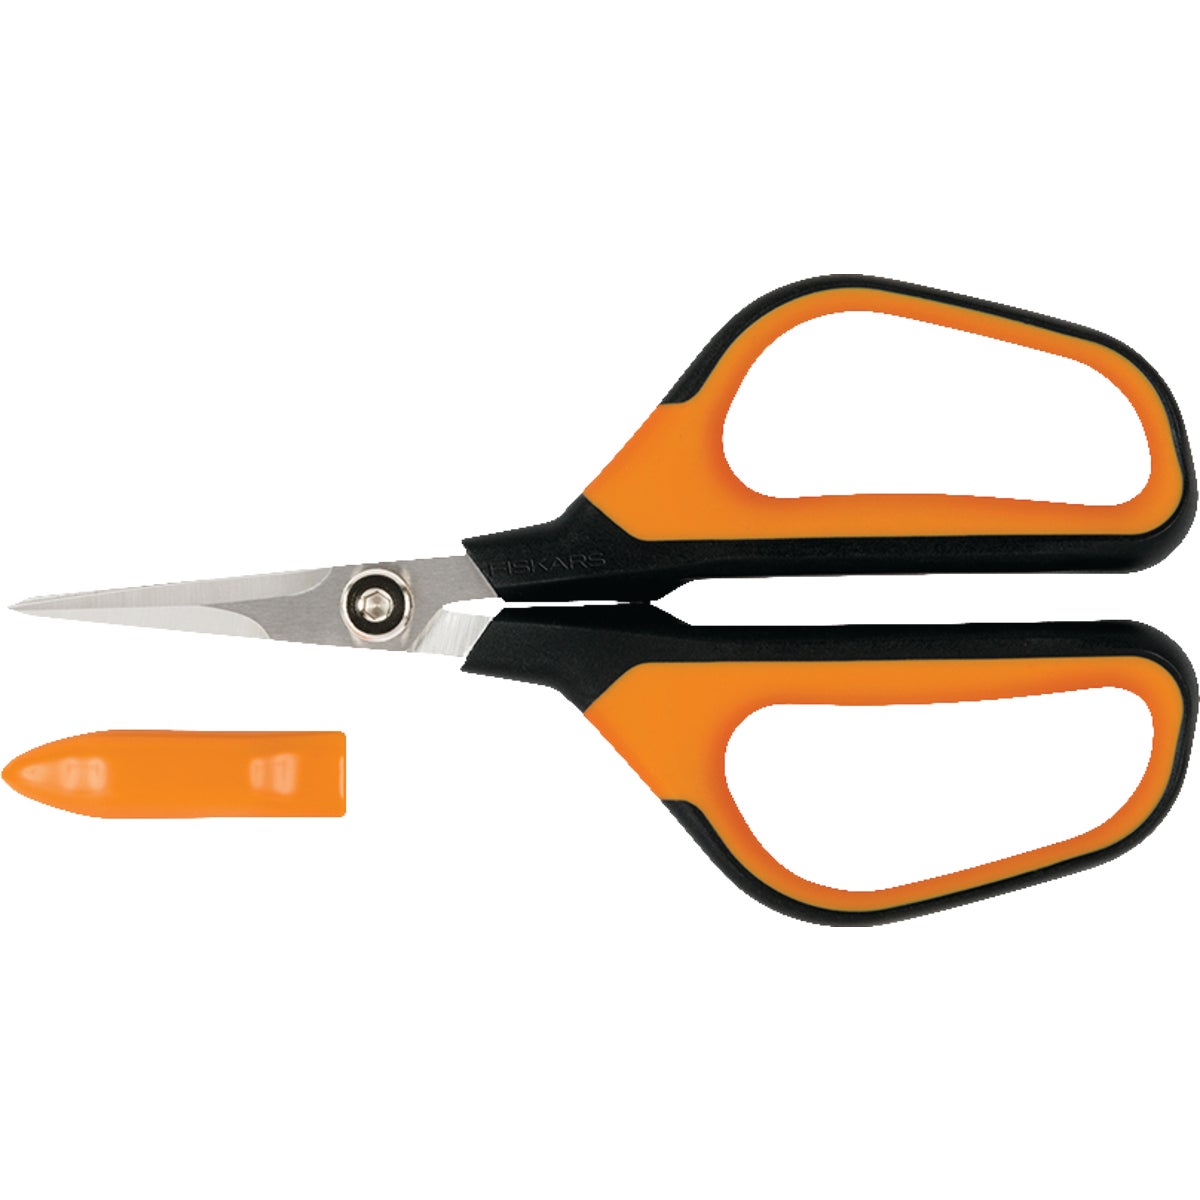 Item 705727, Micro-Tip pruning shear shapes and trims plants and flowers to encourage 